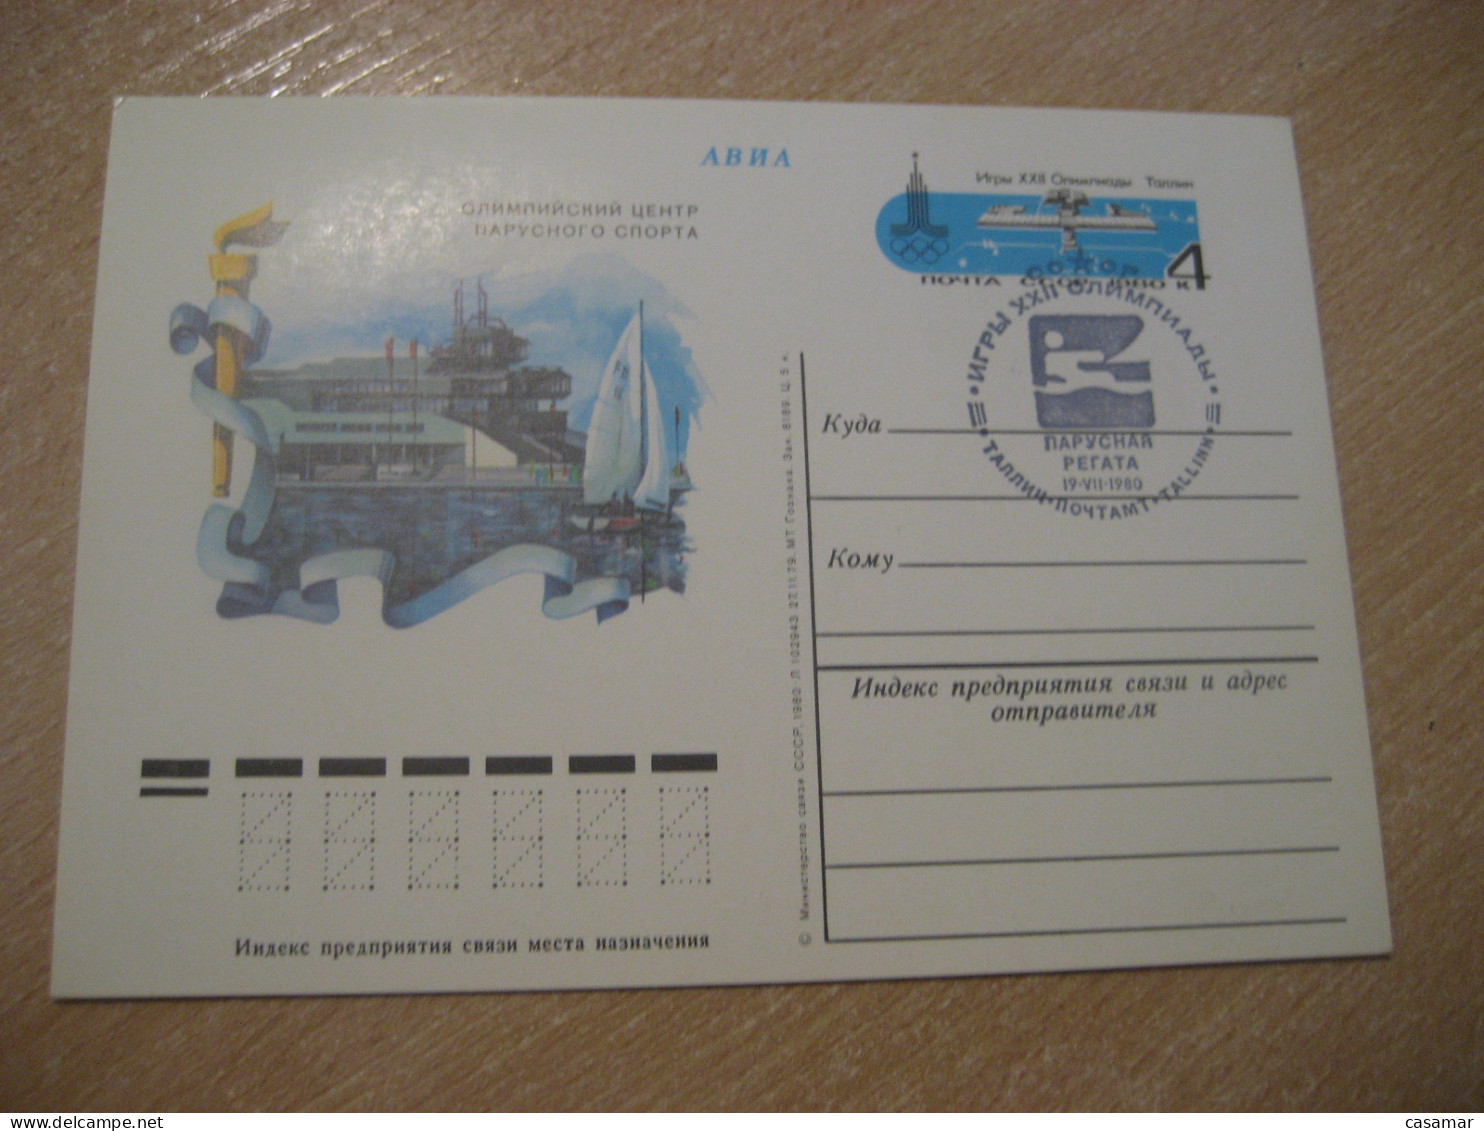 TALLINN 1980 Sail Sailing Moscow Olympic Games Olympics Torch Cancel Postal Stationery Card RUSSIA USSR - Verano 1980: Moscu